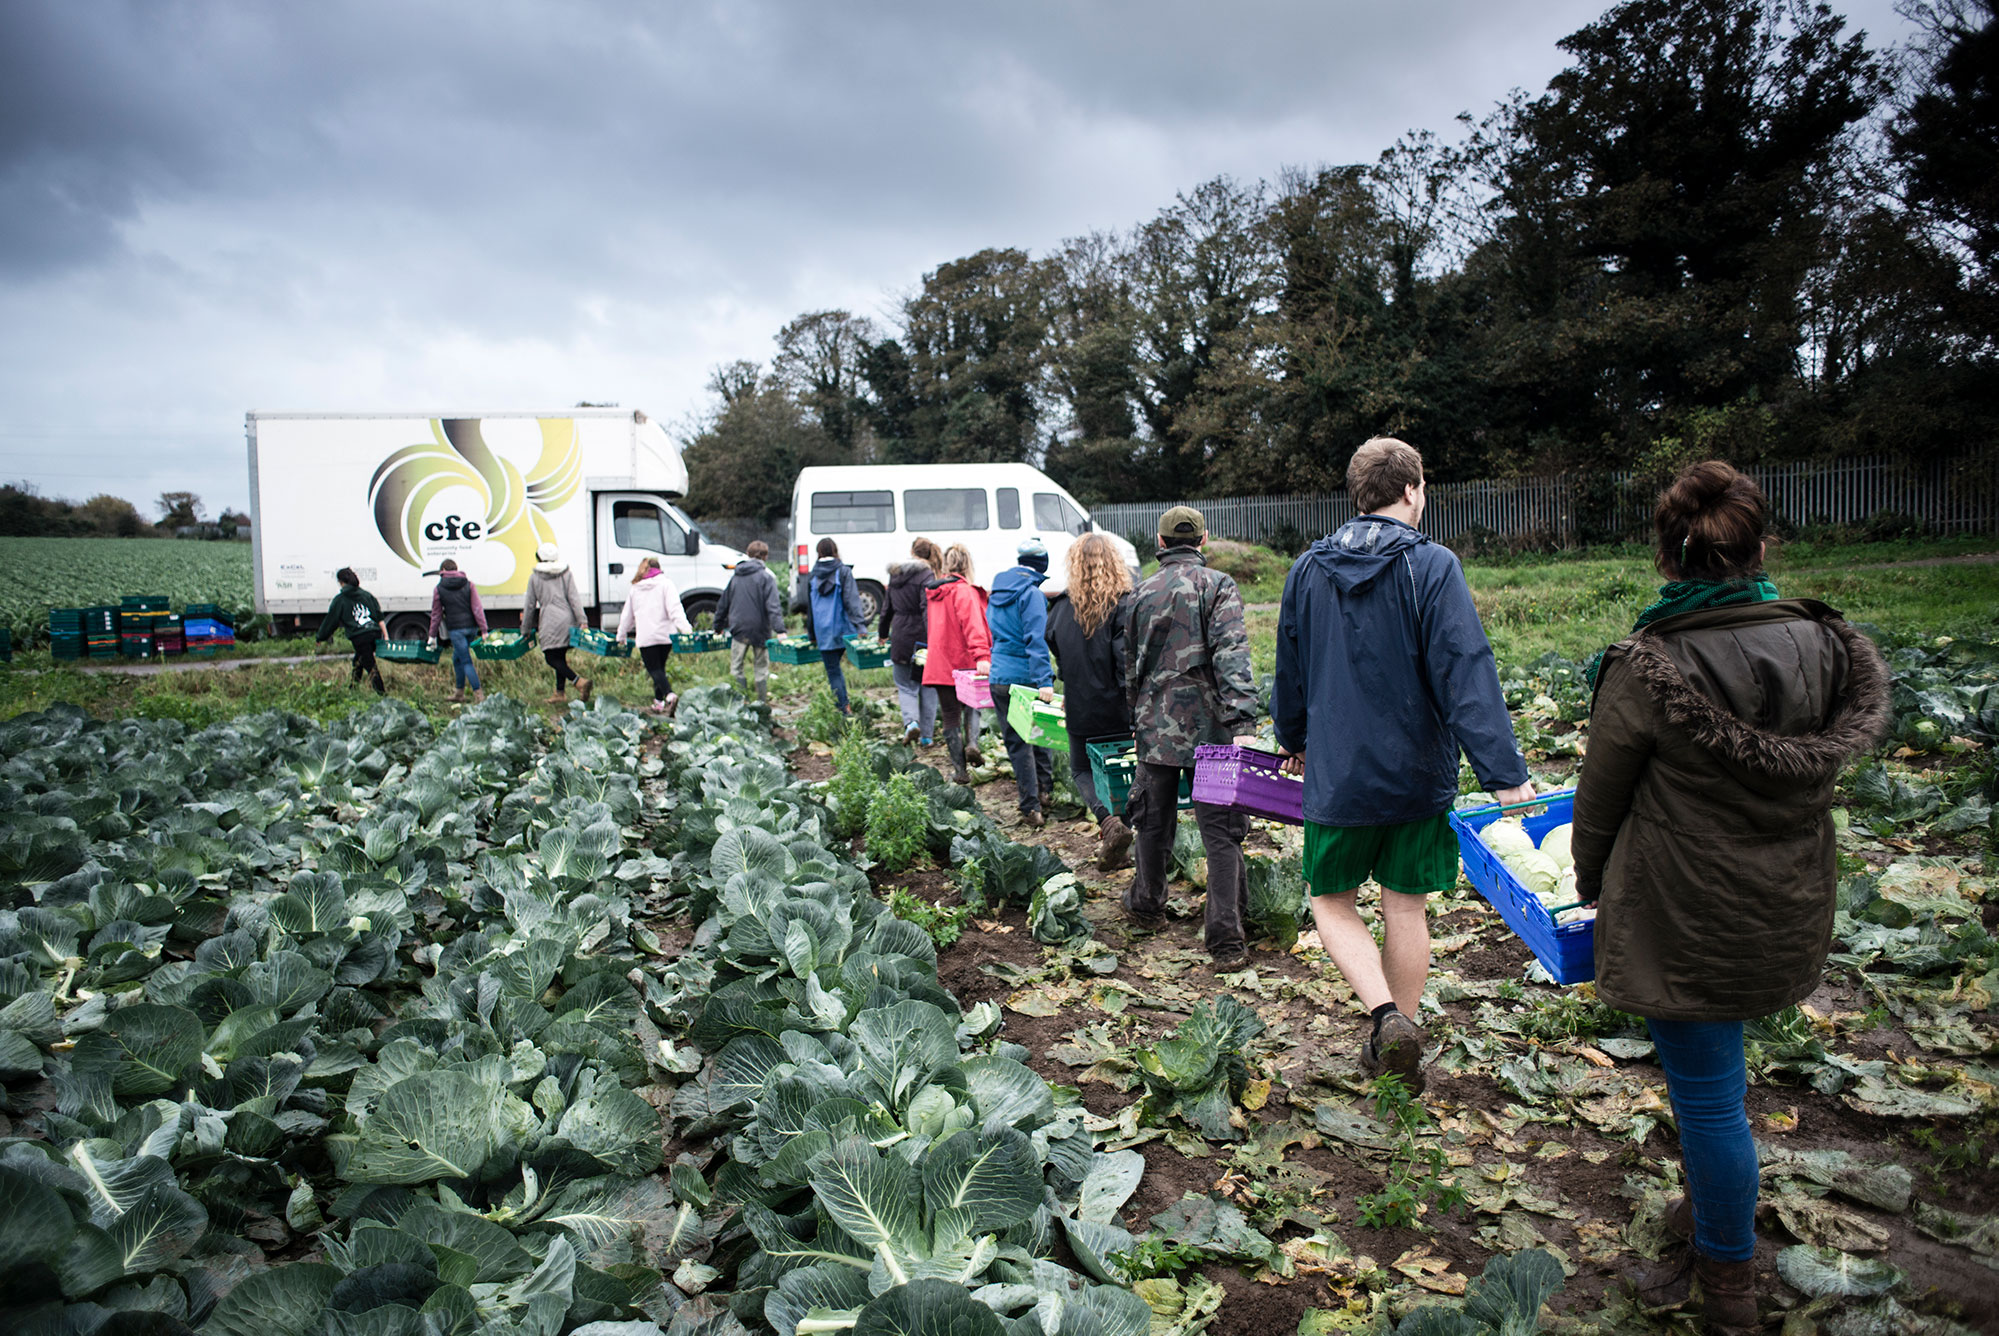 Gleaners harvest cabbages that would have gone to waste to redistribute to local charities